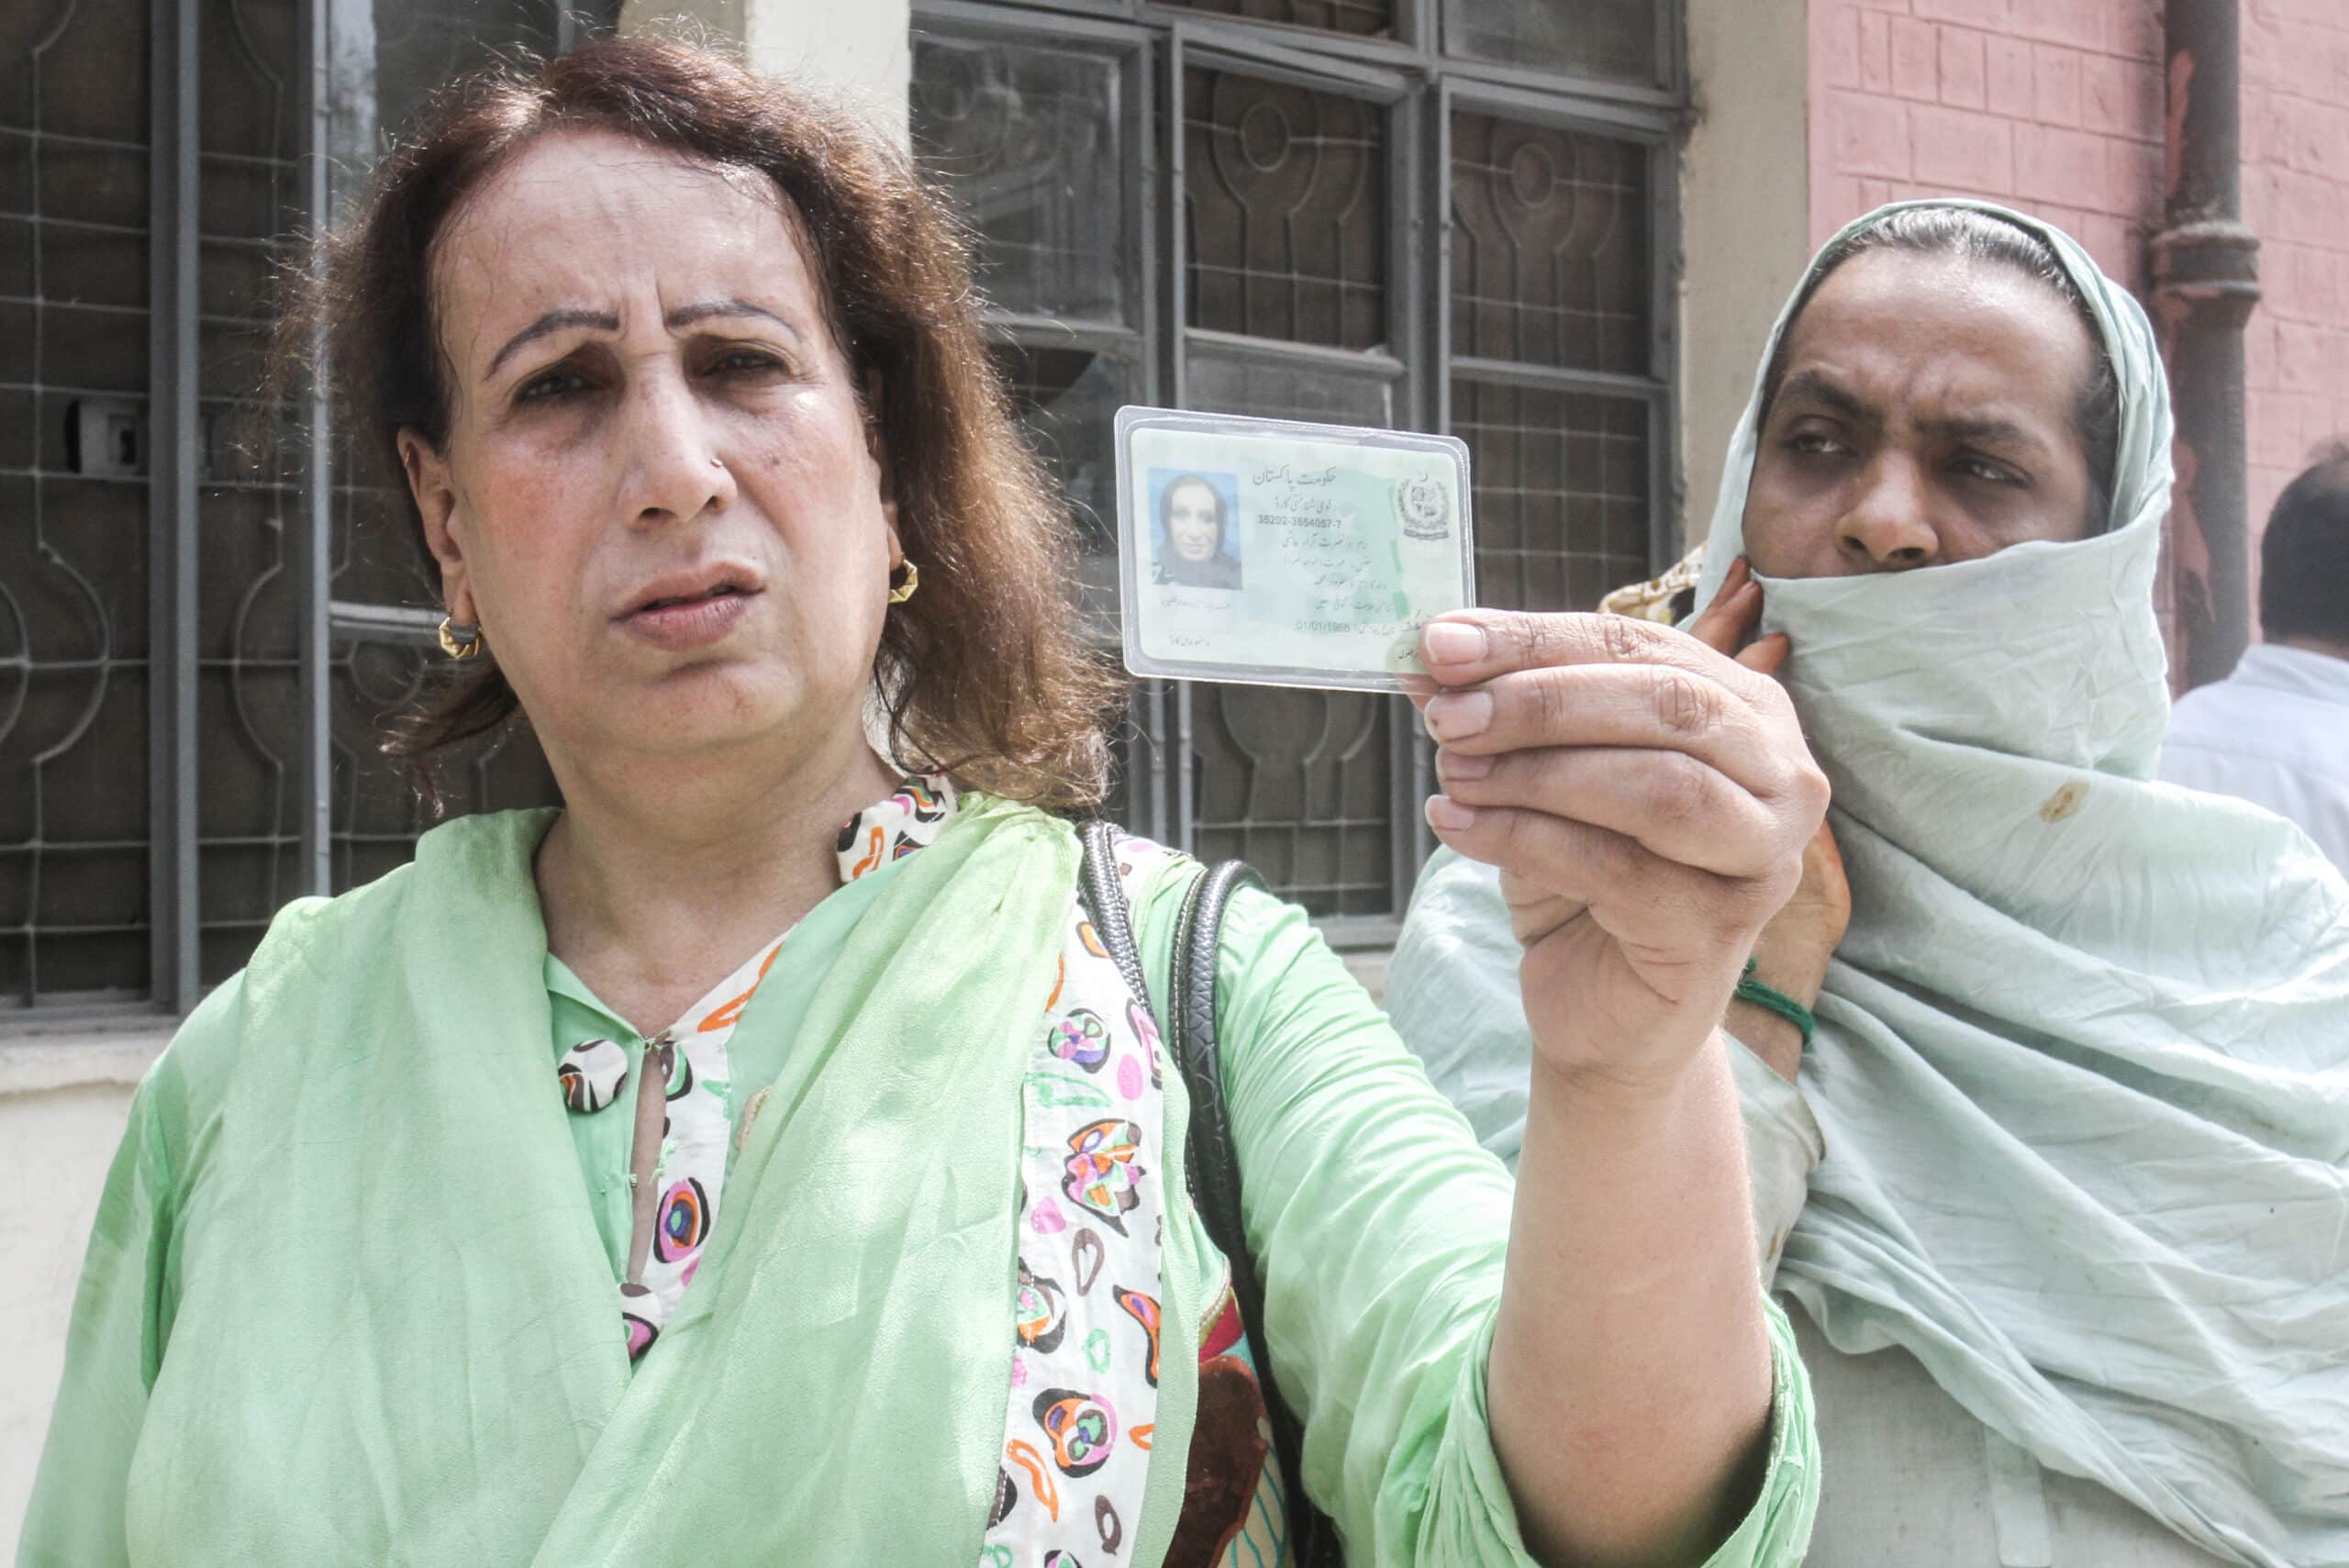 Pakistani Transgender person holds her national identity card outside a polling station in Lahore